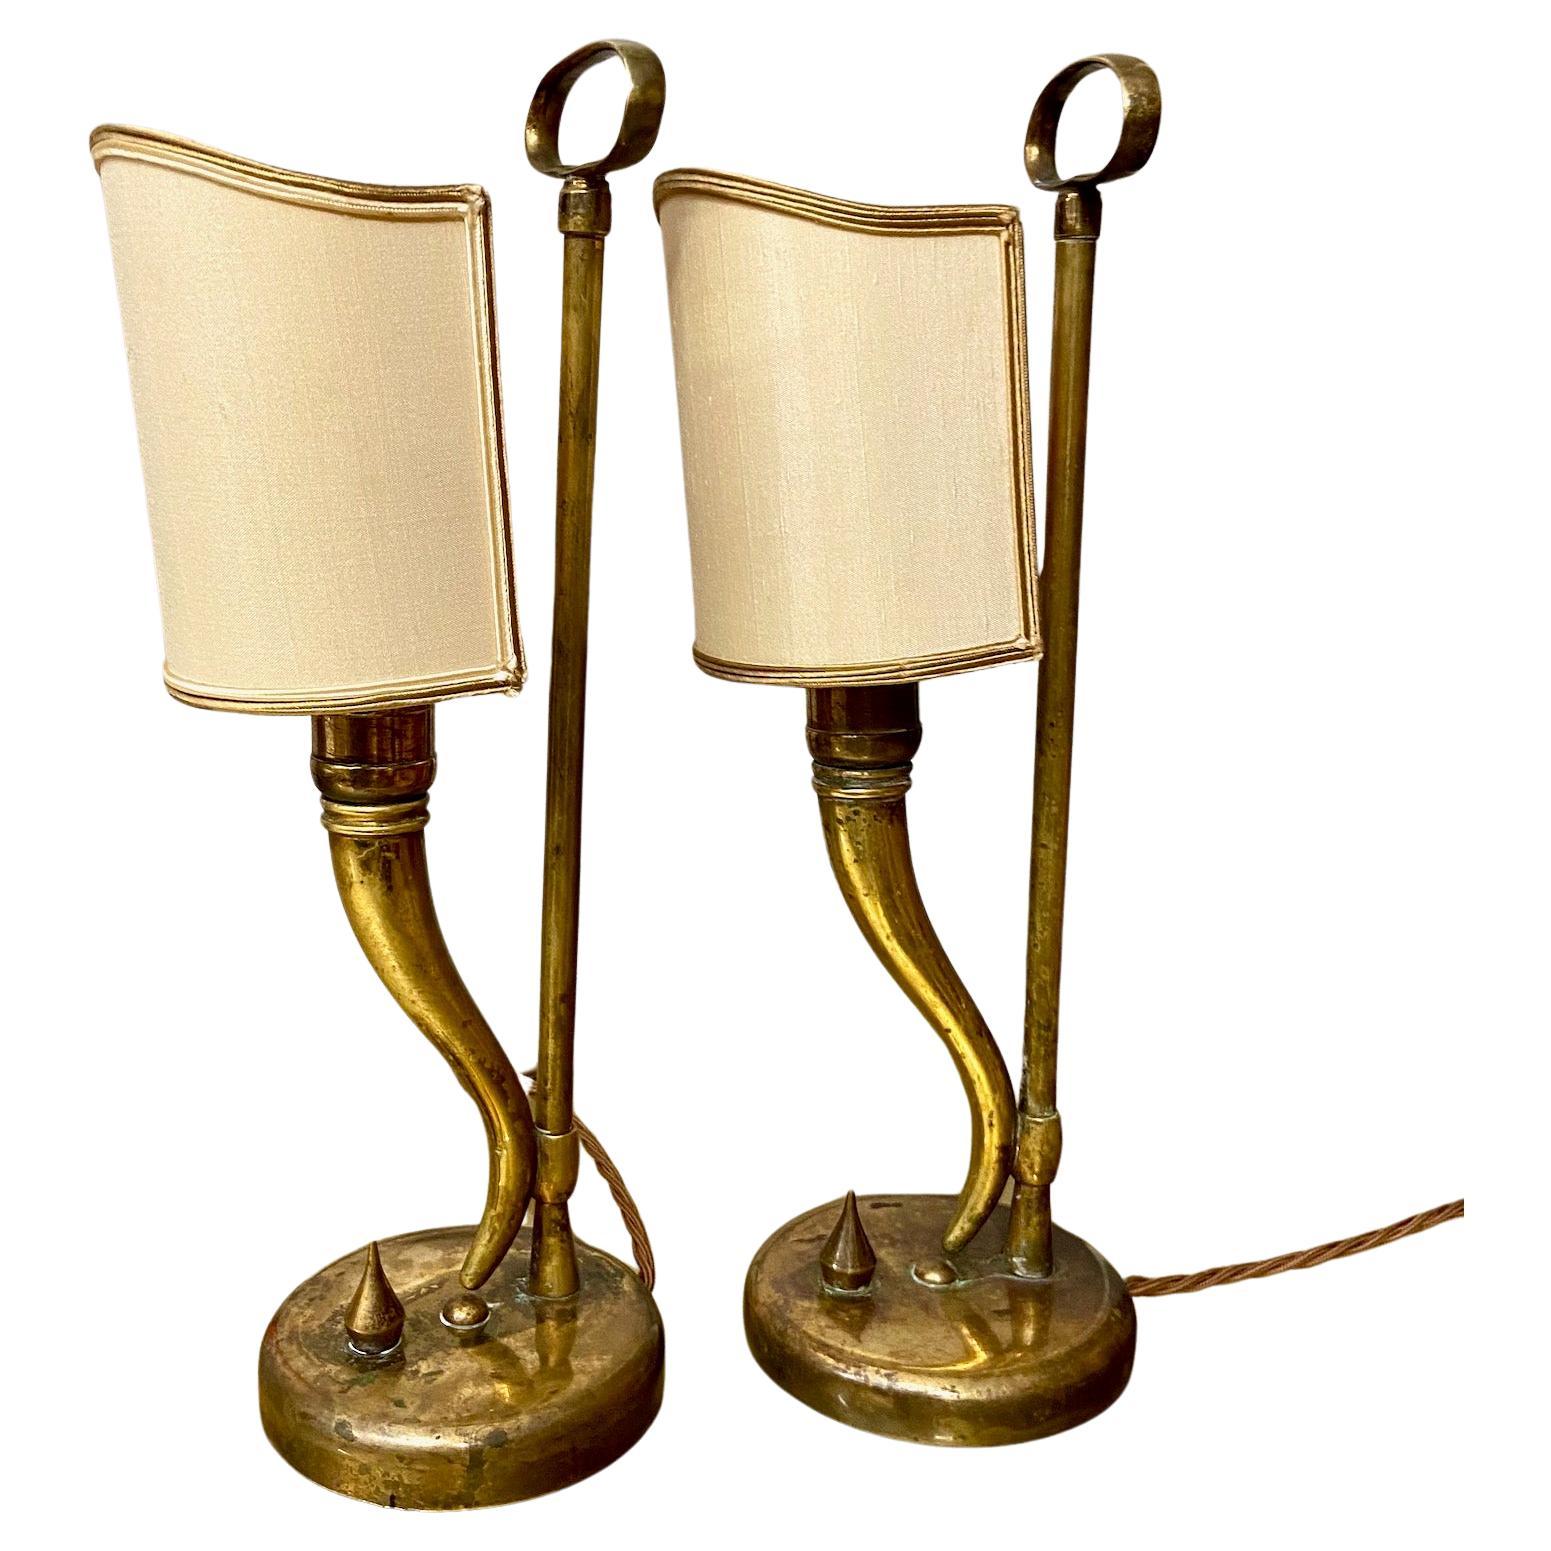 1940s / 50s brass table lamps attributed to Gio Ponti and Emilio Lancia, a pair For Sale